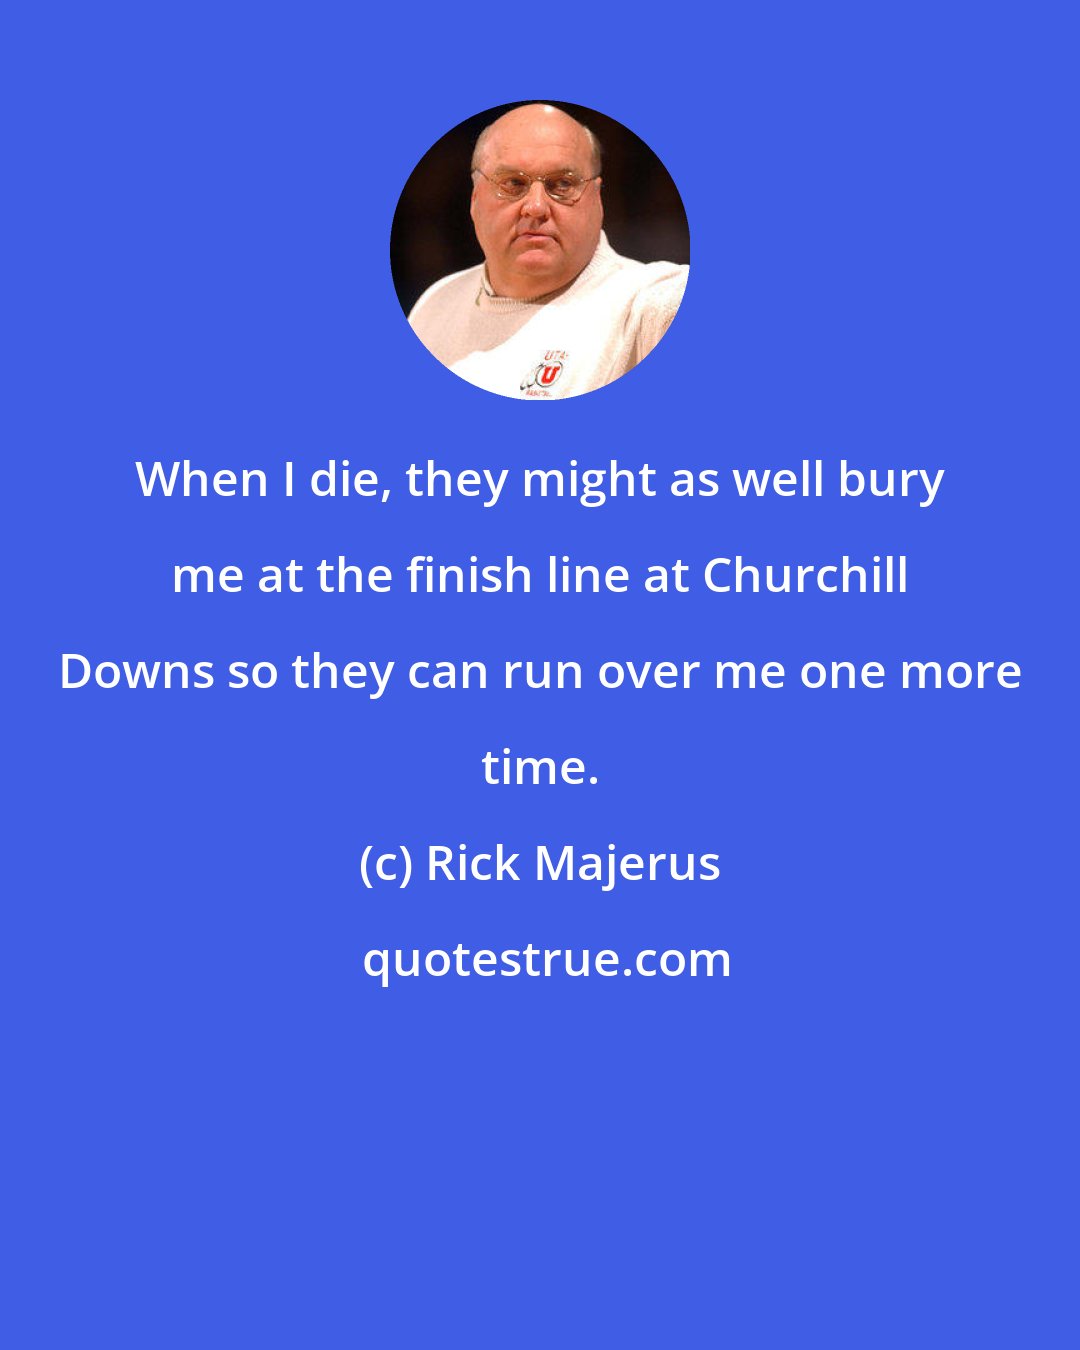 Rick Majerus: When I die, they might as well bury me at the finish line at Churchill Downs so they can run over me one more time.